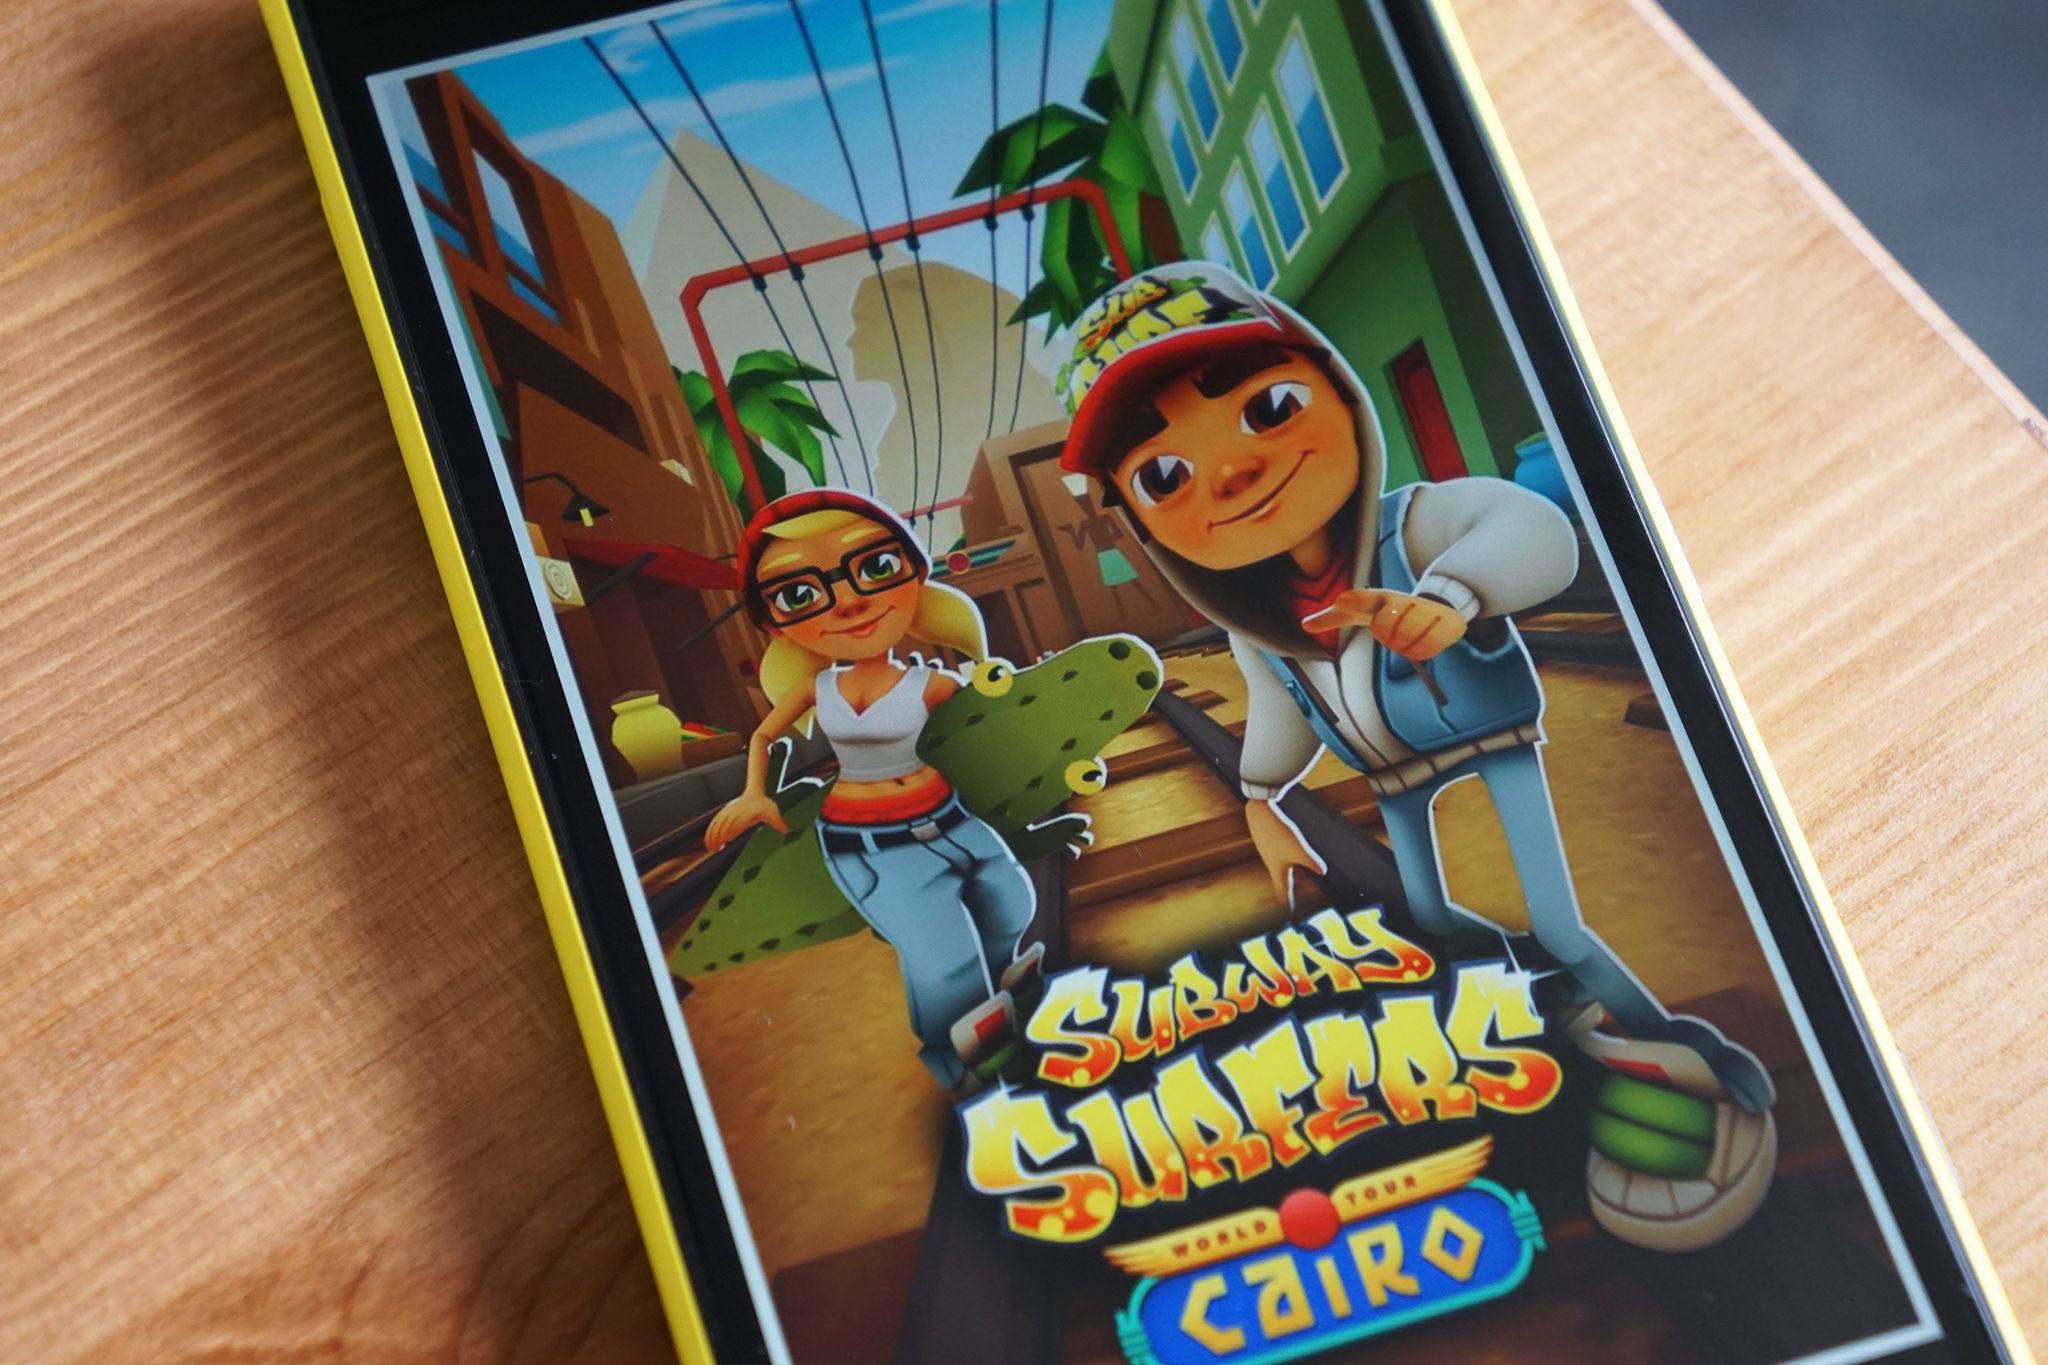 Subway Surfers heads to Cairo in the game's latest update | Windows Central